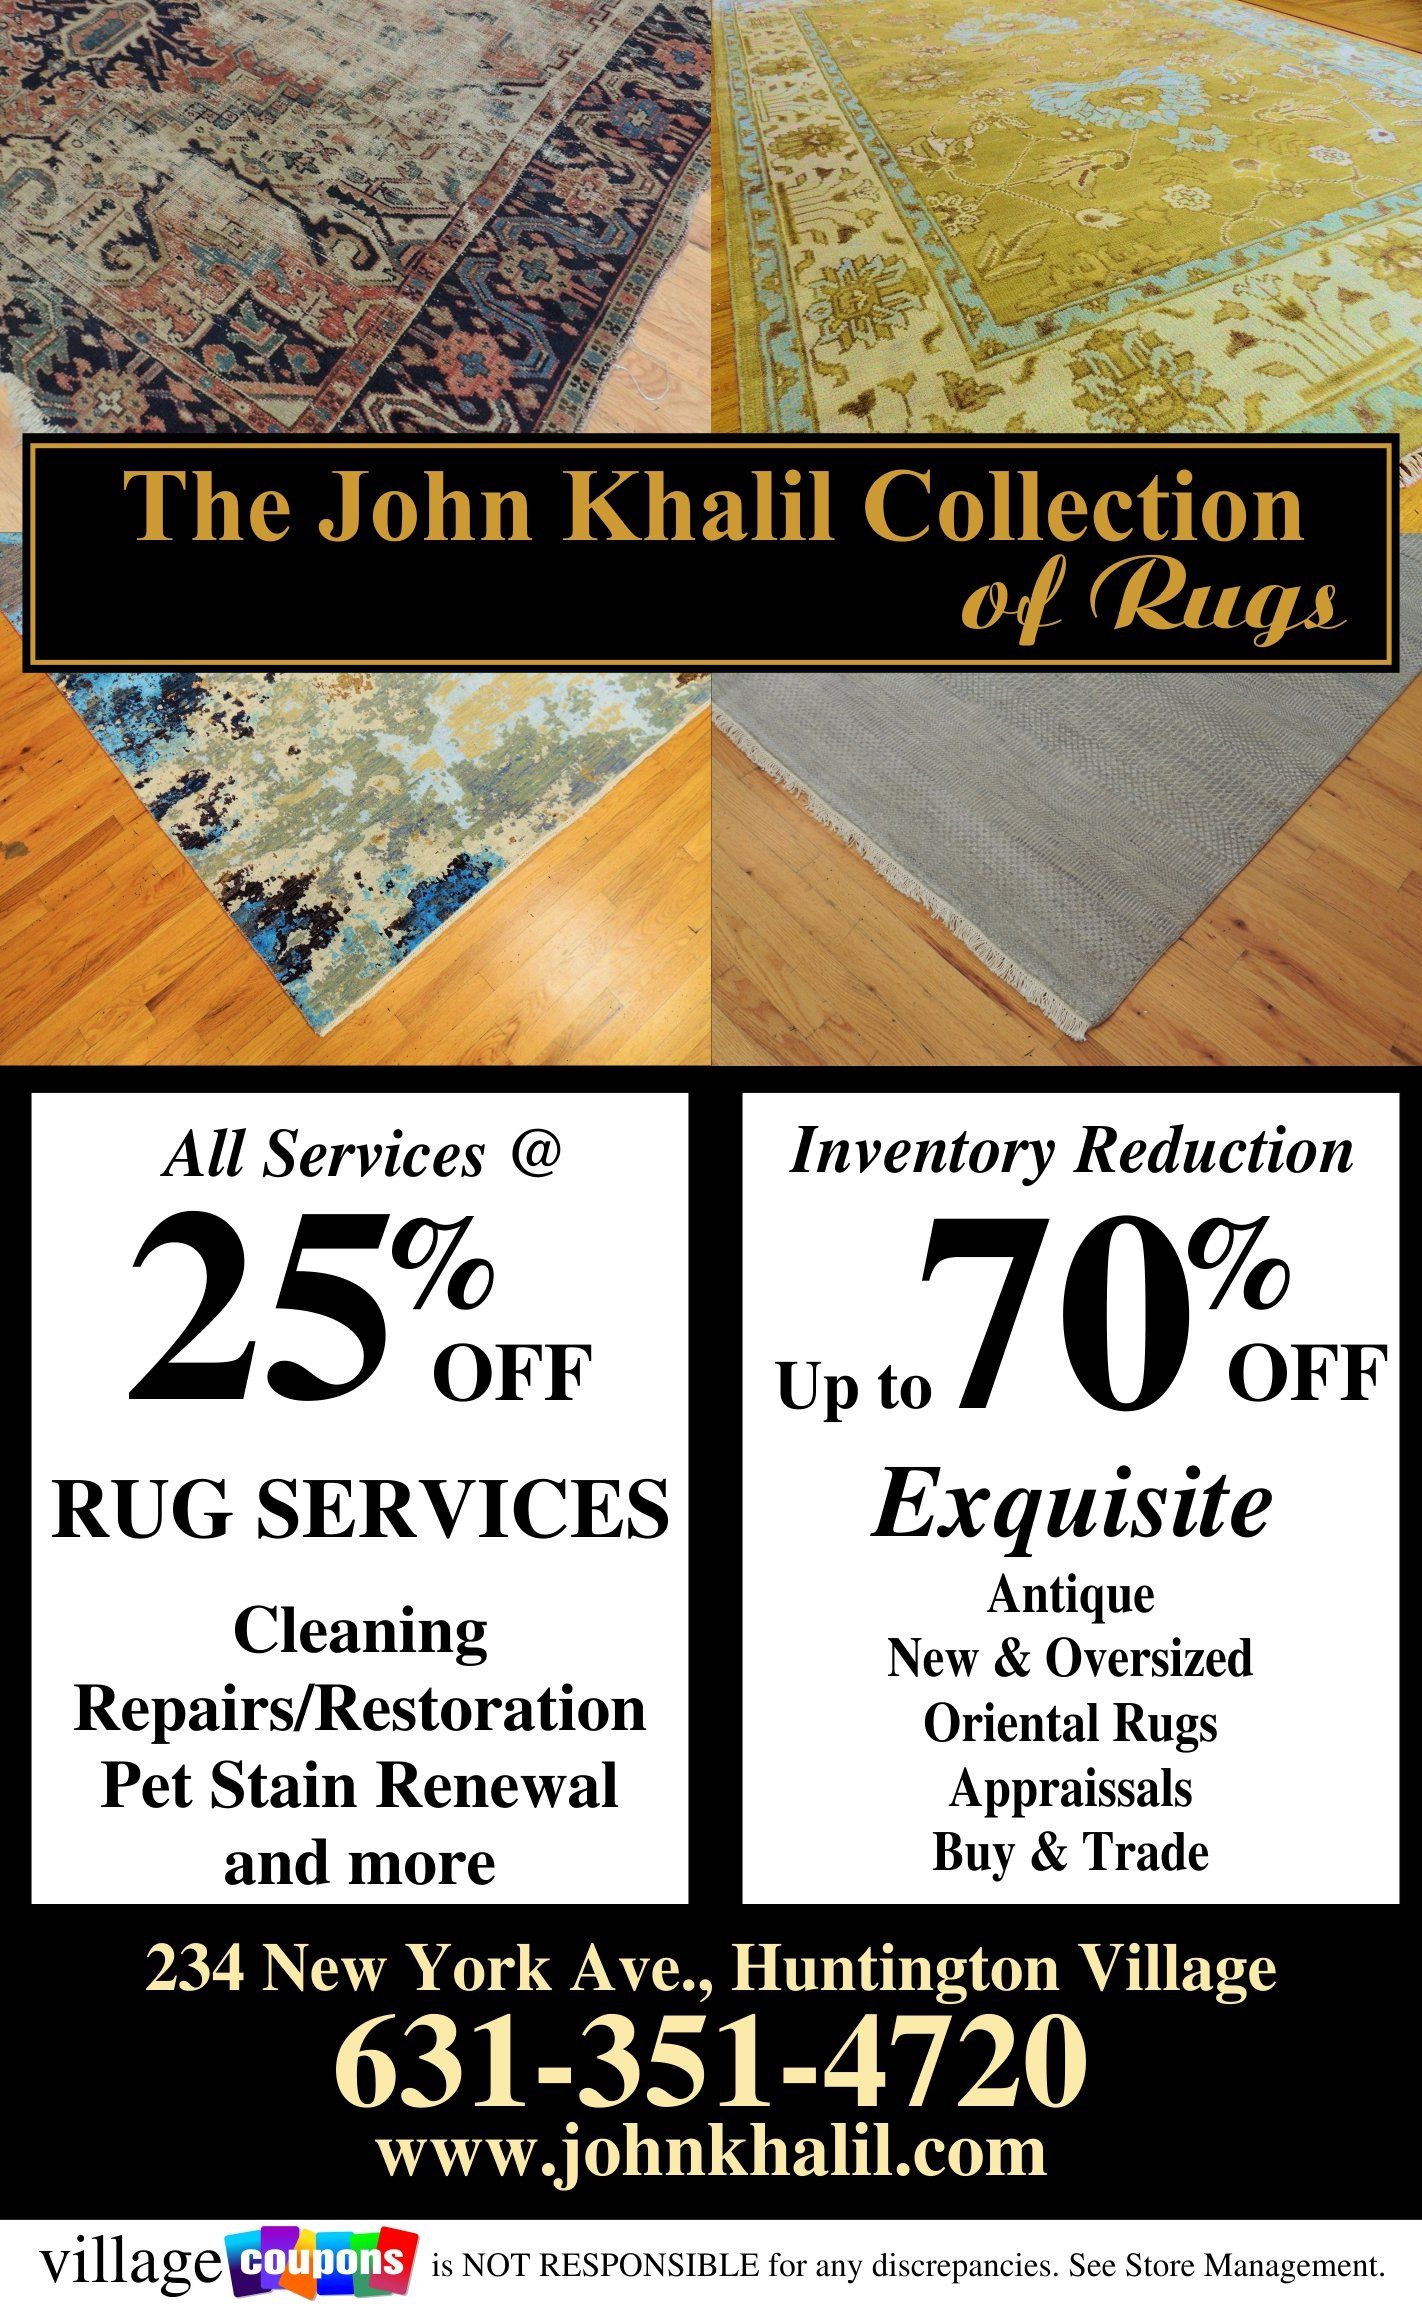 An advertisement for the john khalil collection of rugs